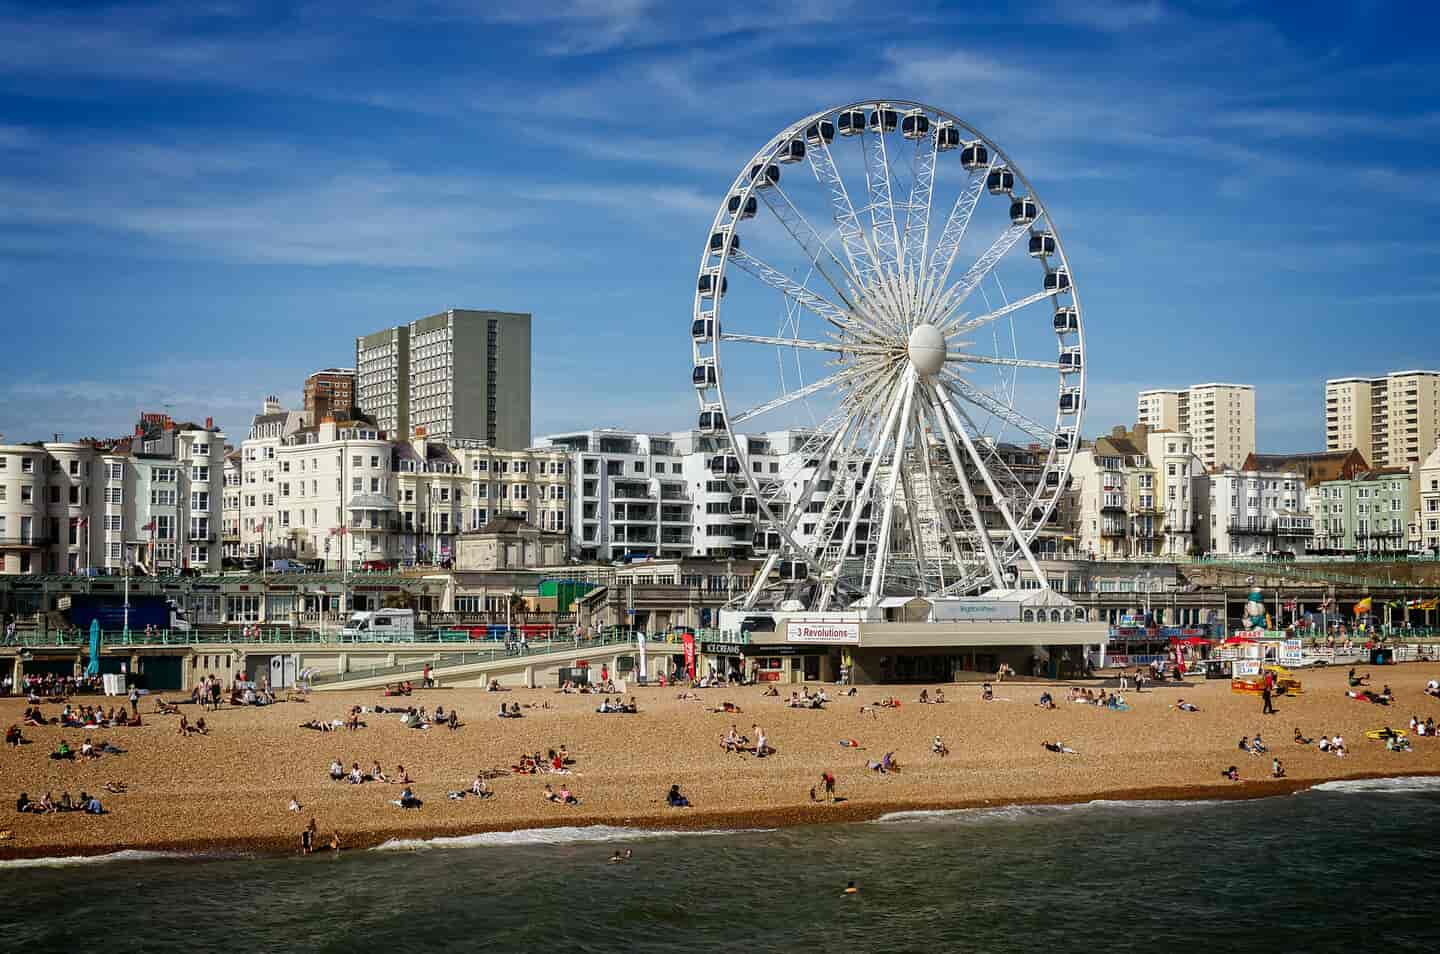 Student Accommodation in Brighton - Brighton seafront on a sunny day